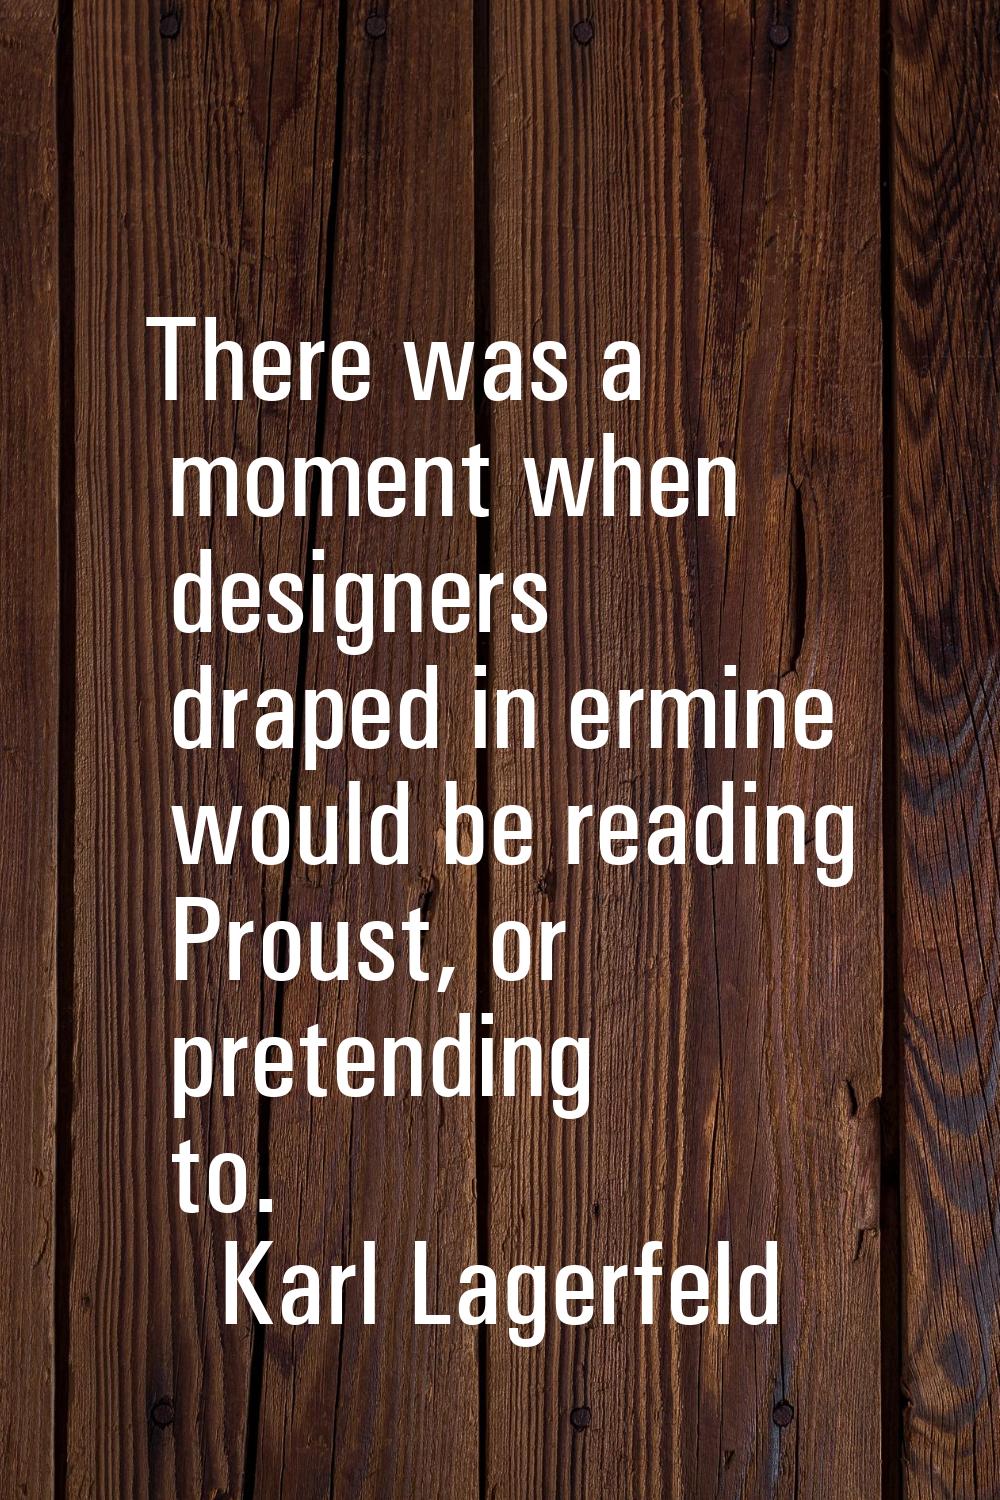 There was a moment when designers draped in ermine would be reading Proust, or pretending to.